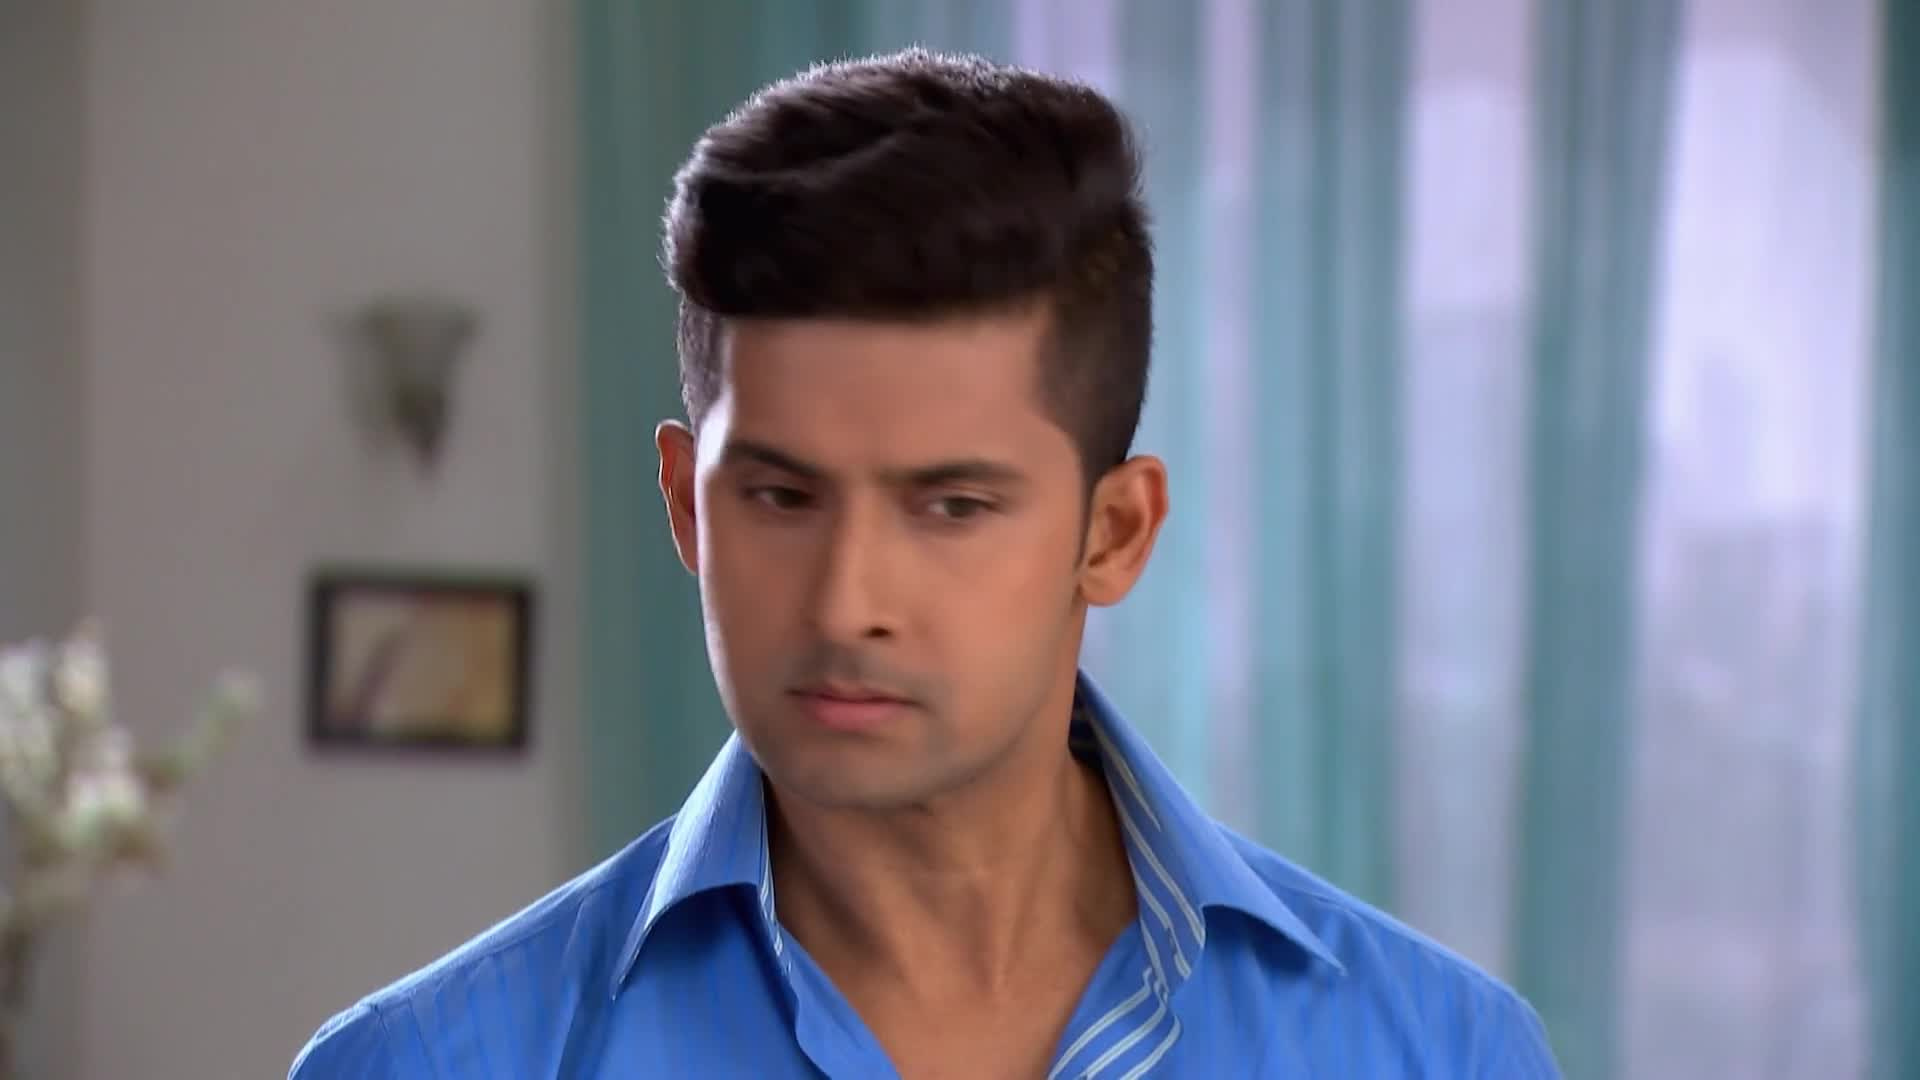 Jamai Raja actor Ravi Dubey sings praises for mother in law! - Bollywood  News & Gossip, Movie Reviews, Trailers & Videos at Bollywoodlife.com